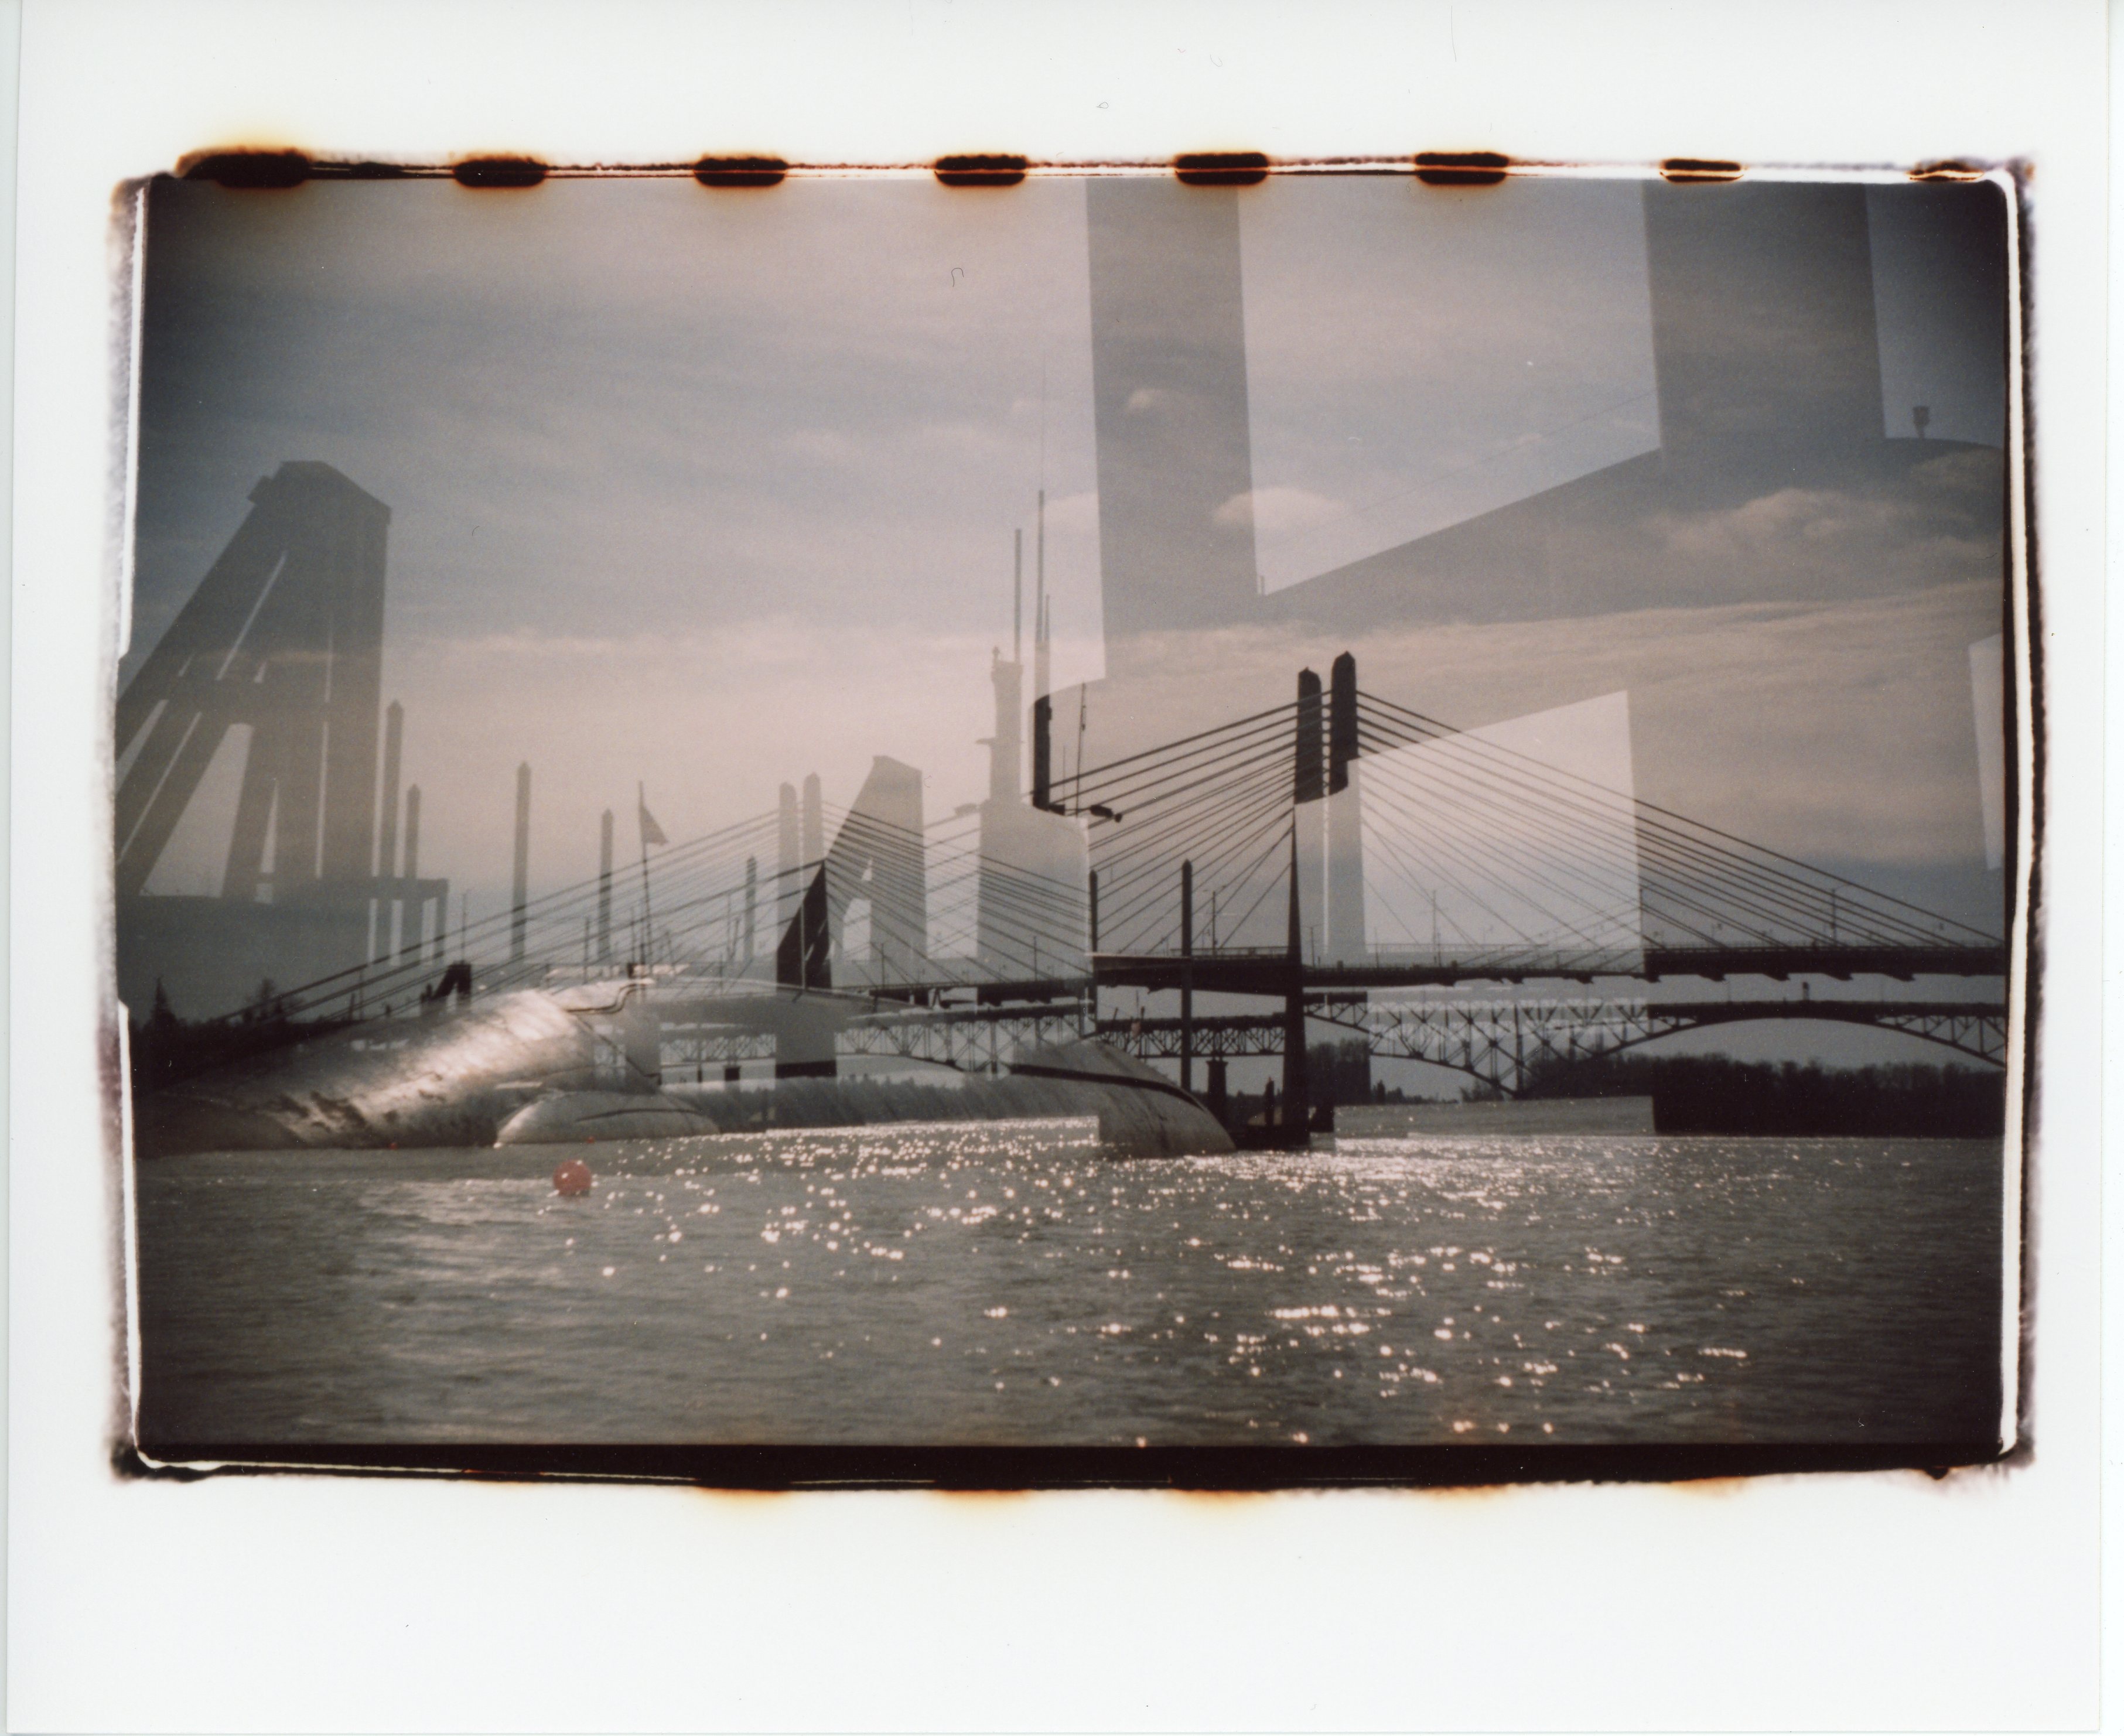 a 35mm color print with messy edges that show bits of the sprocket holes; the lower third of the image is water sparkling in the sun with a small red buoy floating a ways off towards the left side; the middle third shows the pilings, arches, and suspension cables of multiple exposures of docks and bridges; the upper third is mostly sky which is sunny with some clouds and hazy; on the right of the image, faintly in the foreground are two large pilings connected by a beam; on the left side the shiny round hull of a submarine that is part of OMSI is partially visible